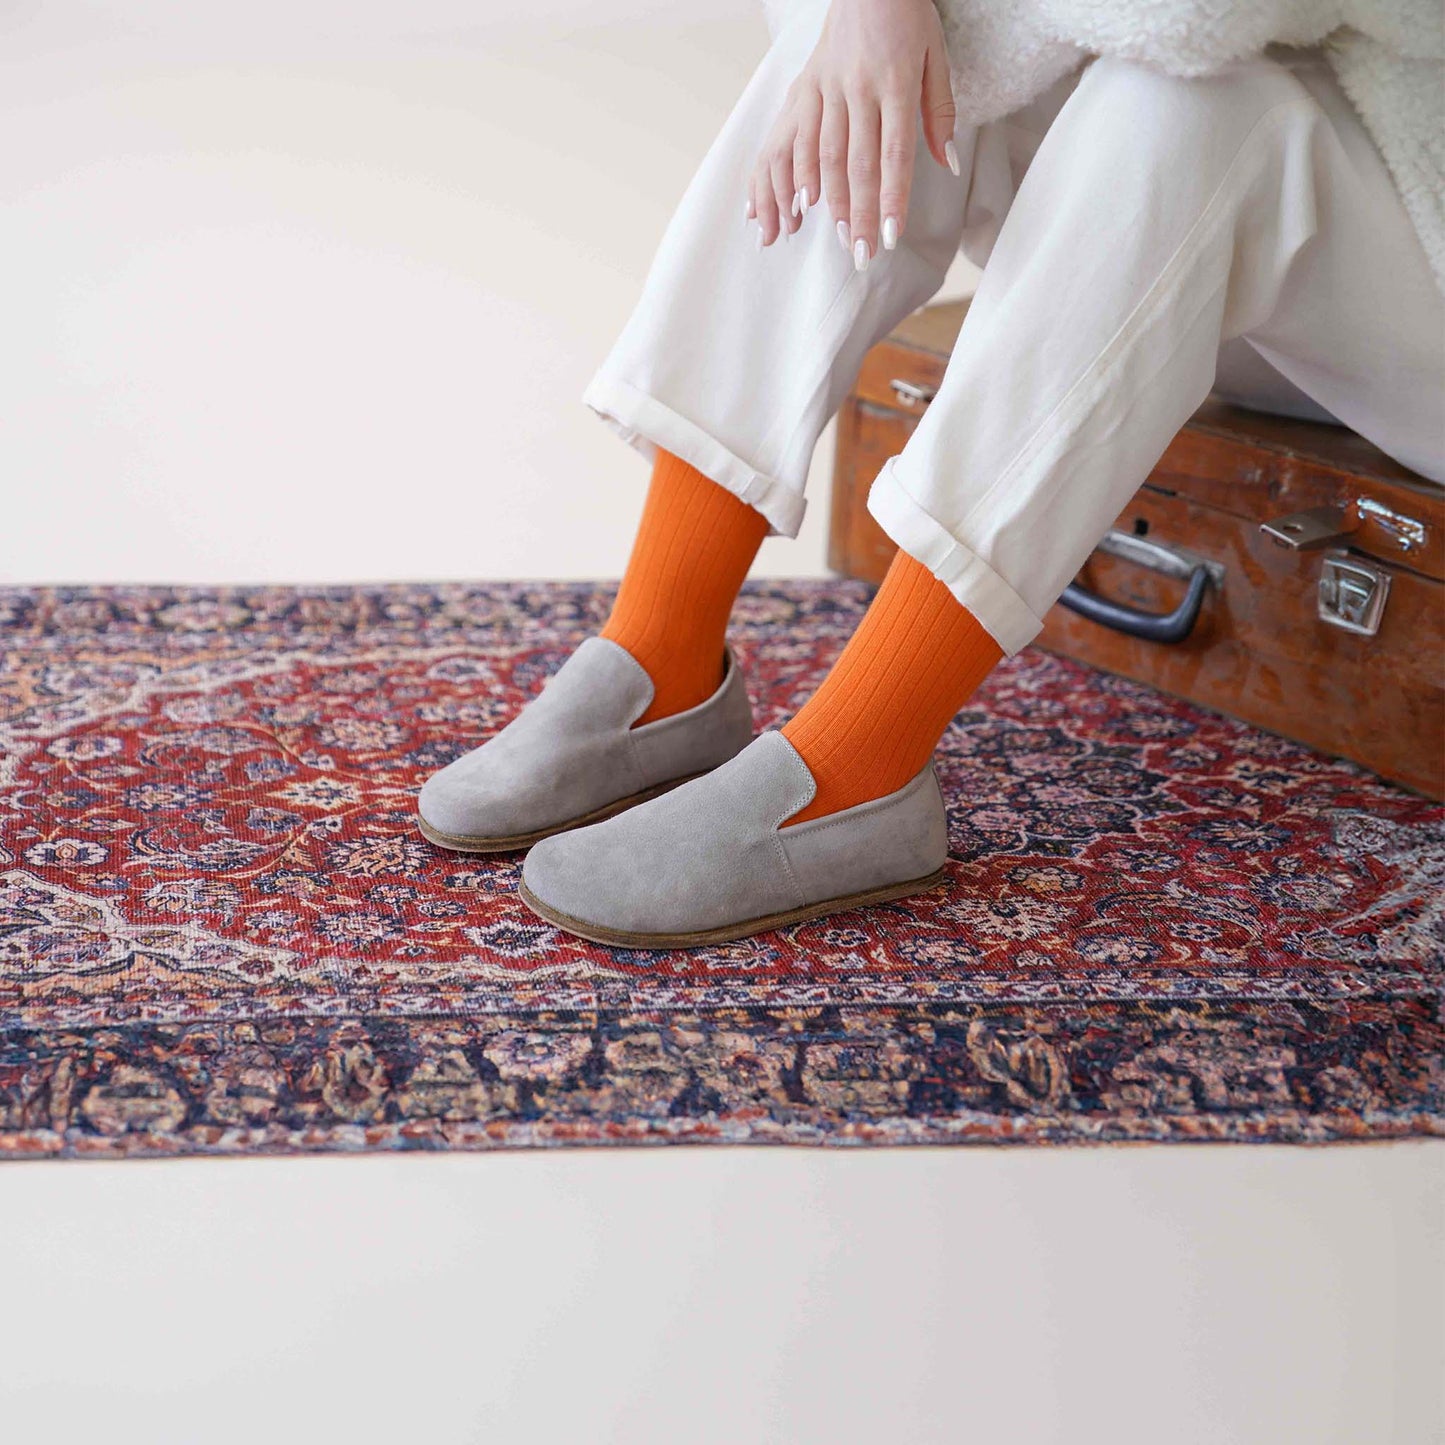 Aeolia gray suede barefoot women loafers, paired with white pants and orange socks, on a patterned rug by a vintage suitcase.